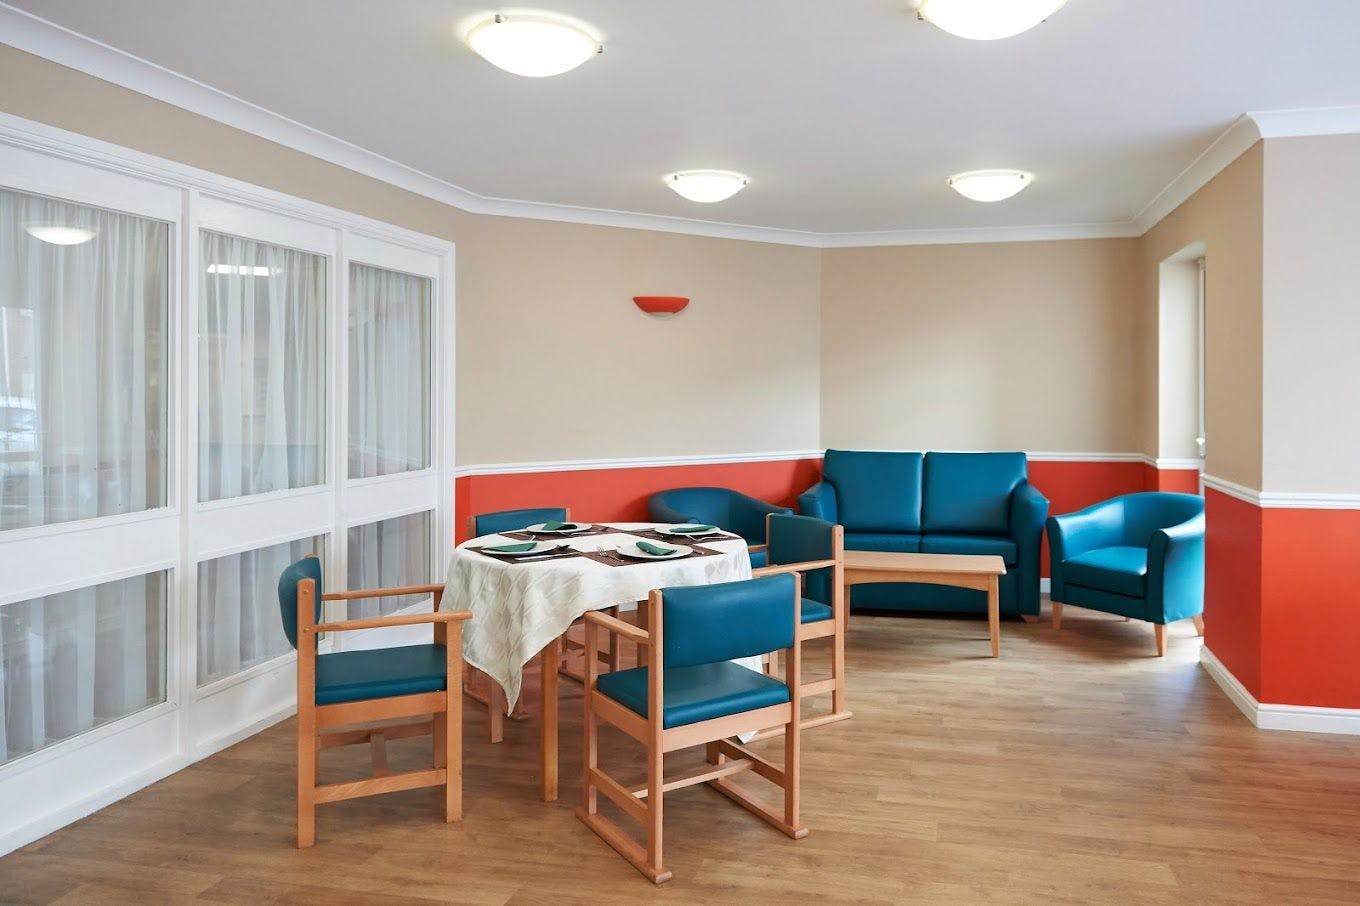 Bupa - Canning Court care home 6